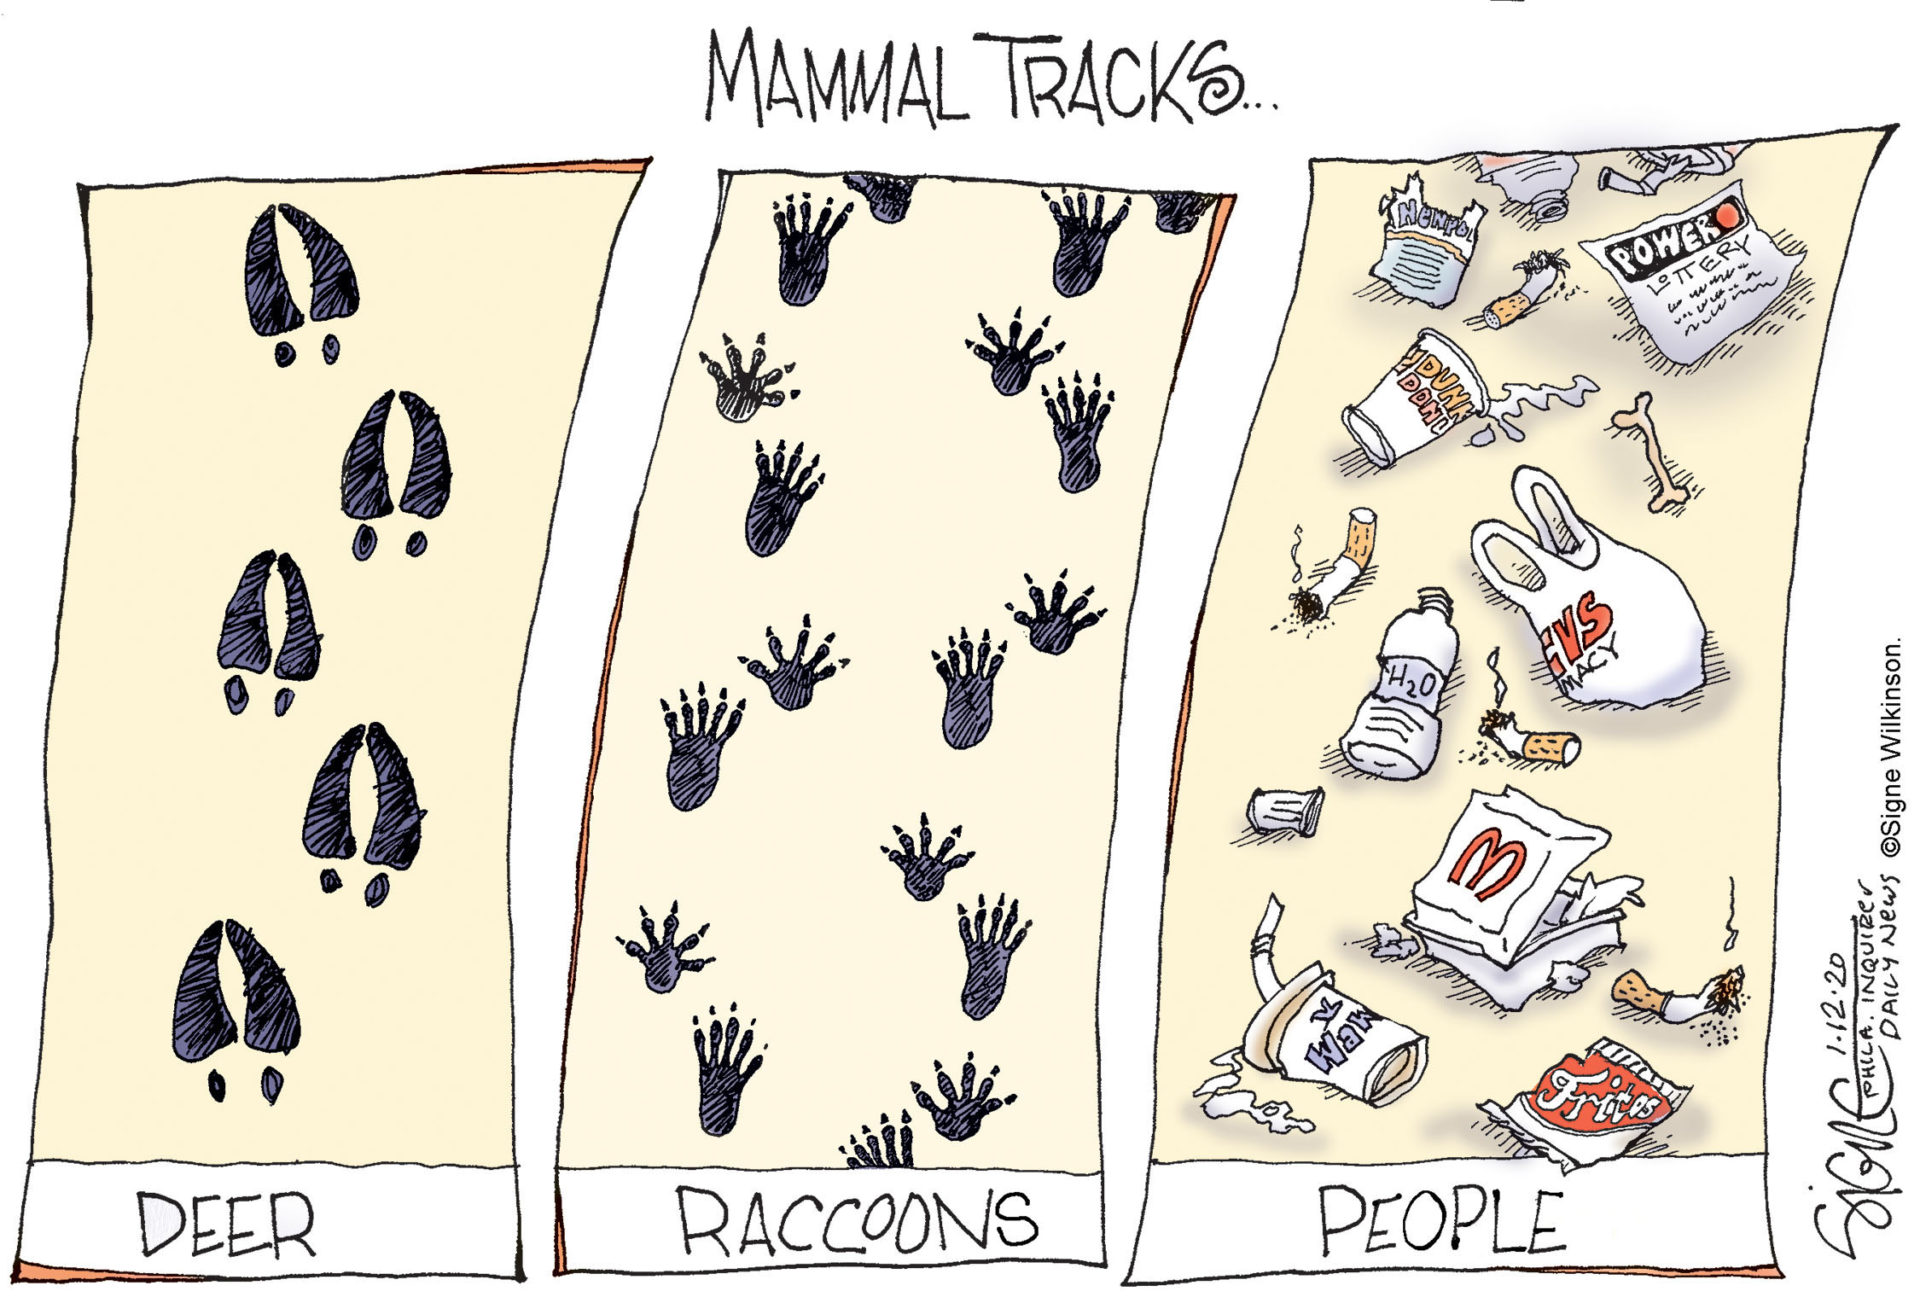 political cartoon depicating 3 sets of tracks: Deer hoves and racoon paws each which create impermenant indentions in the ground. 3rd is people whose tracks are litter.